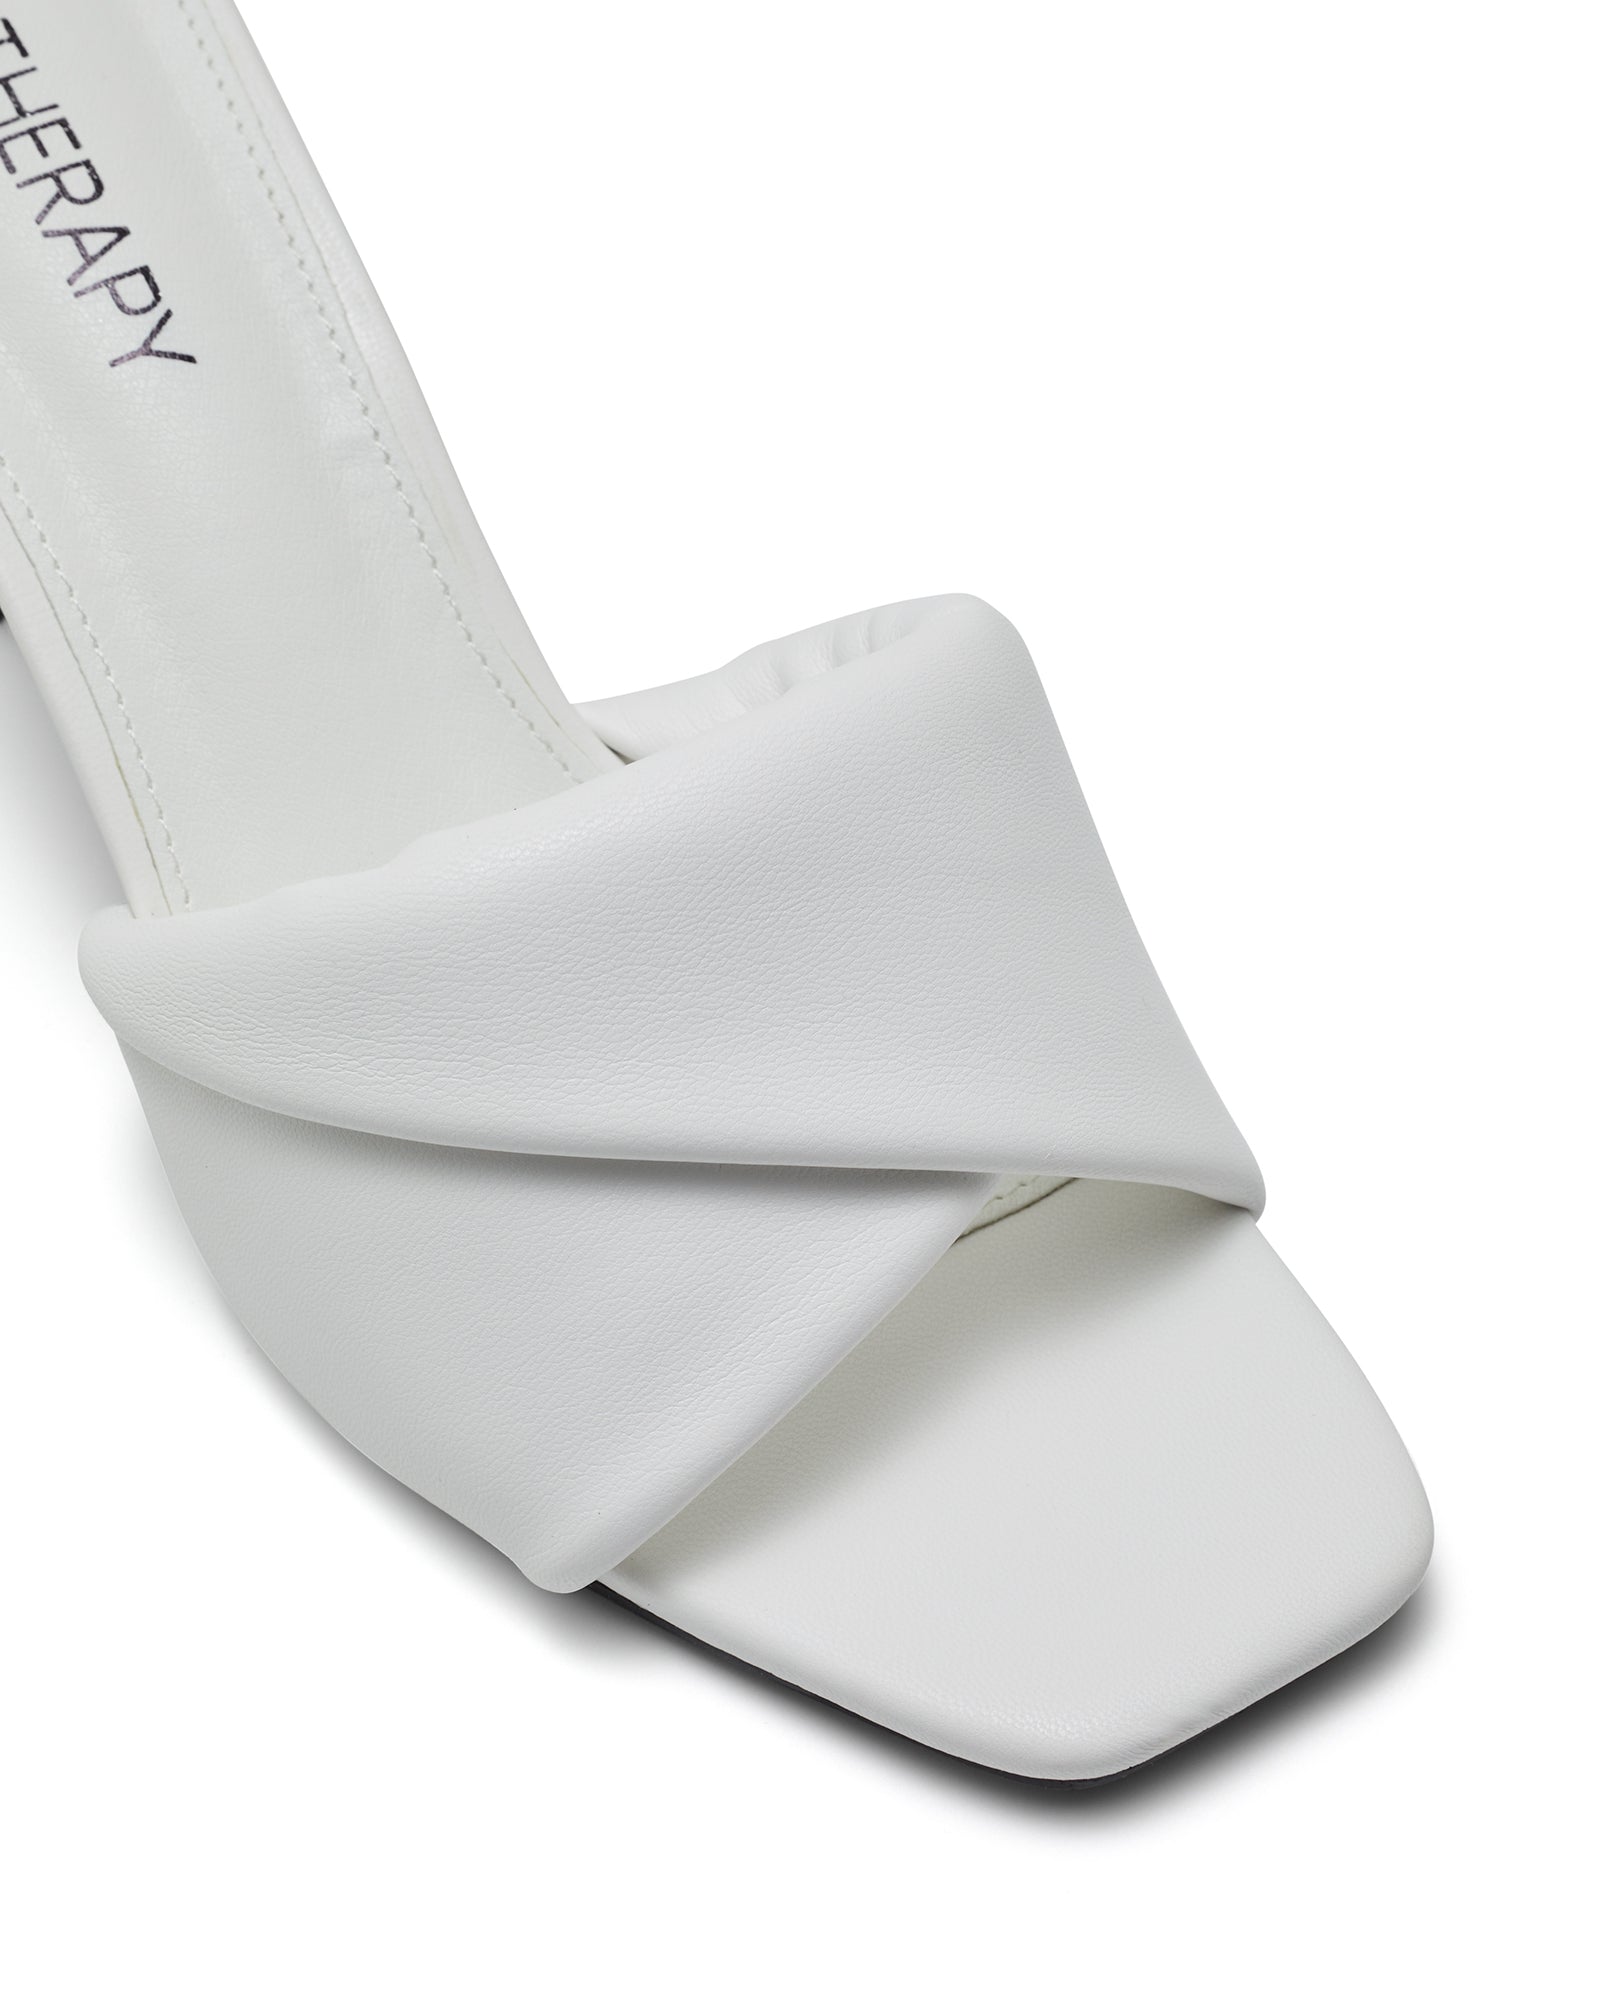 Therapy Shoes Kardi White | Women's Heels | Sandals | Mule | Padded